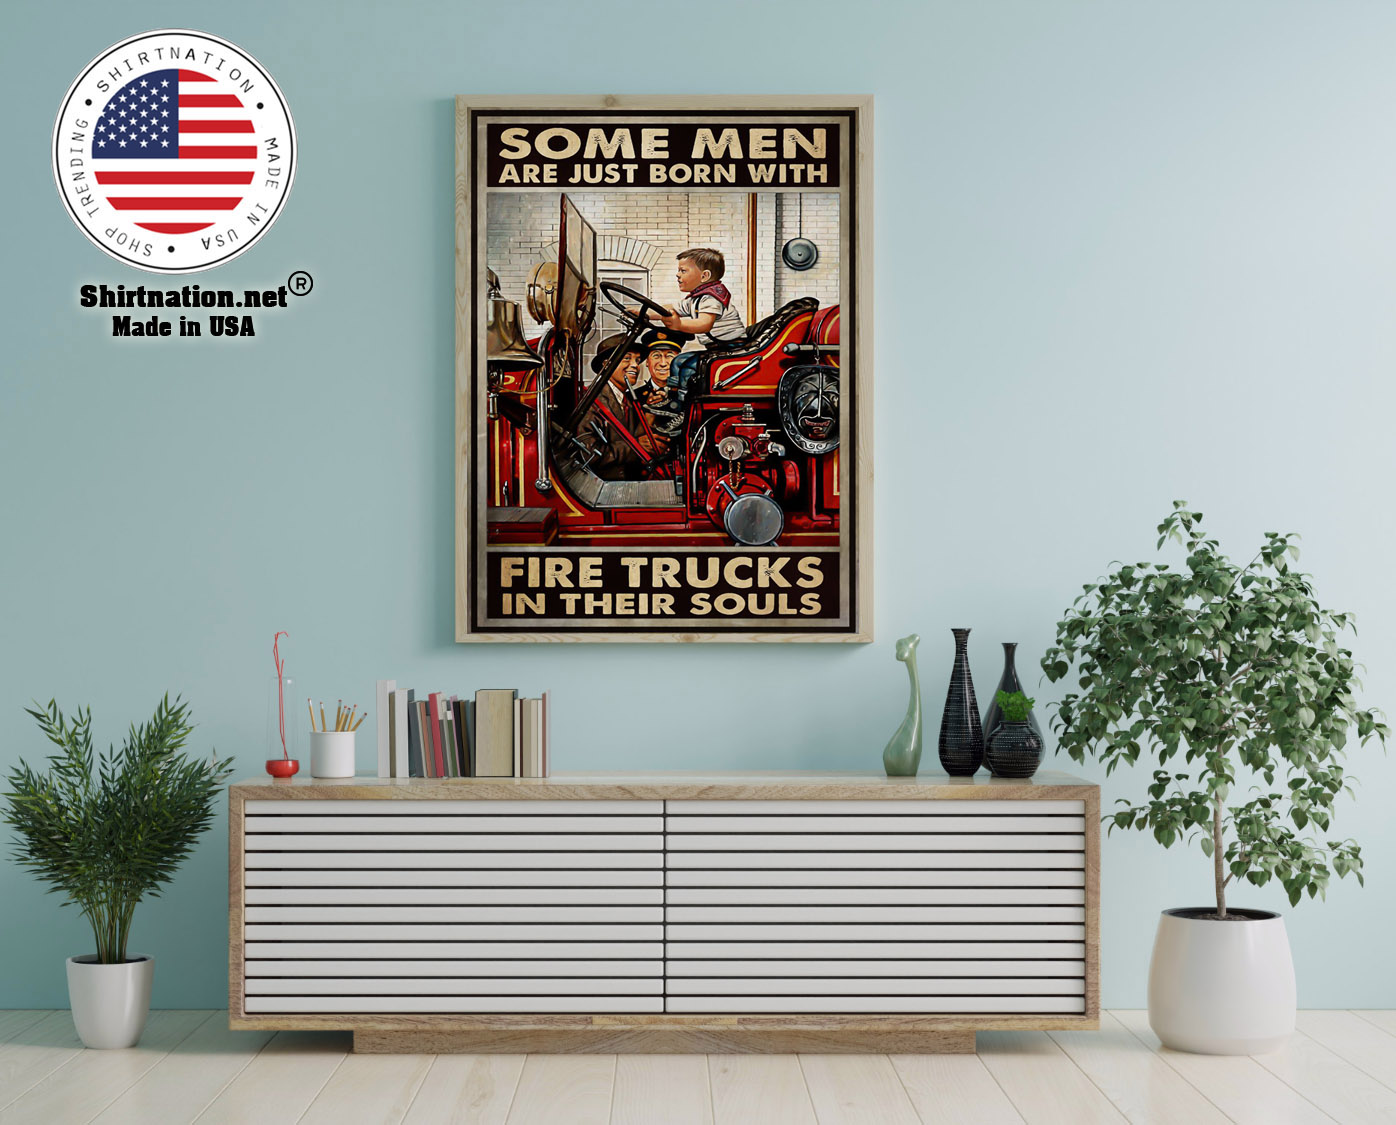 Some men are just born with fire trucks in their souls poster 12